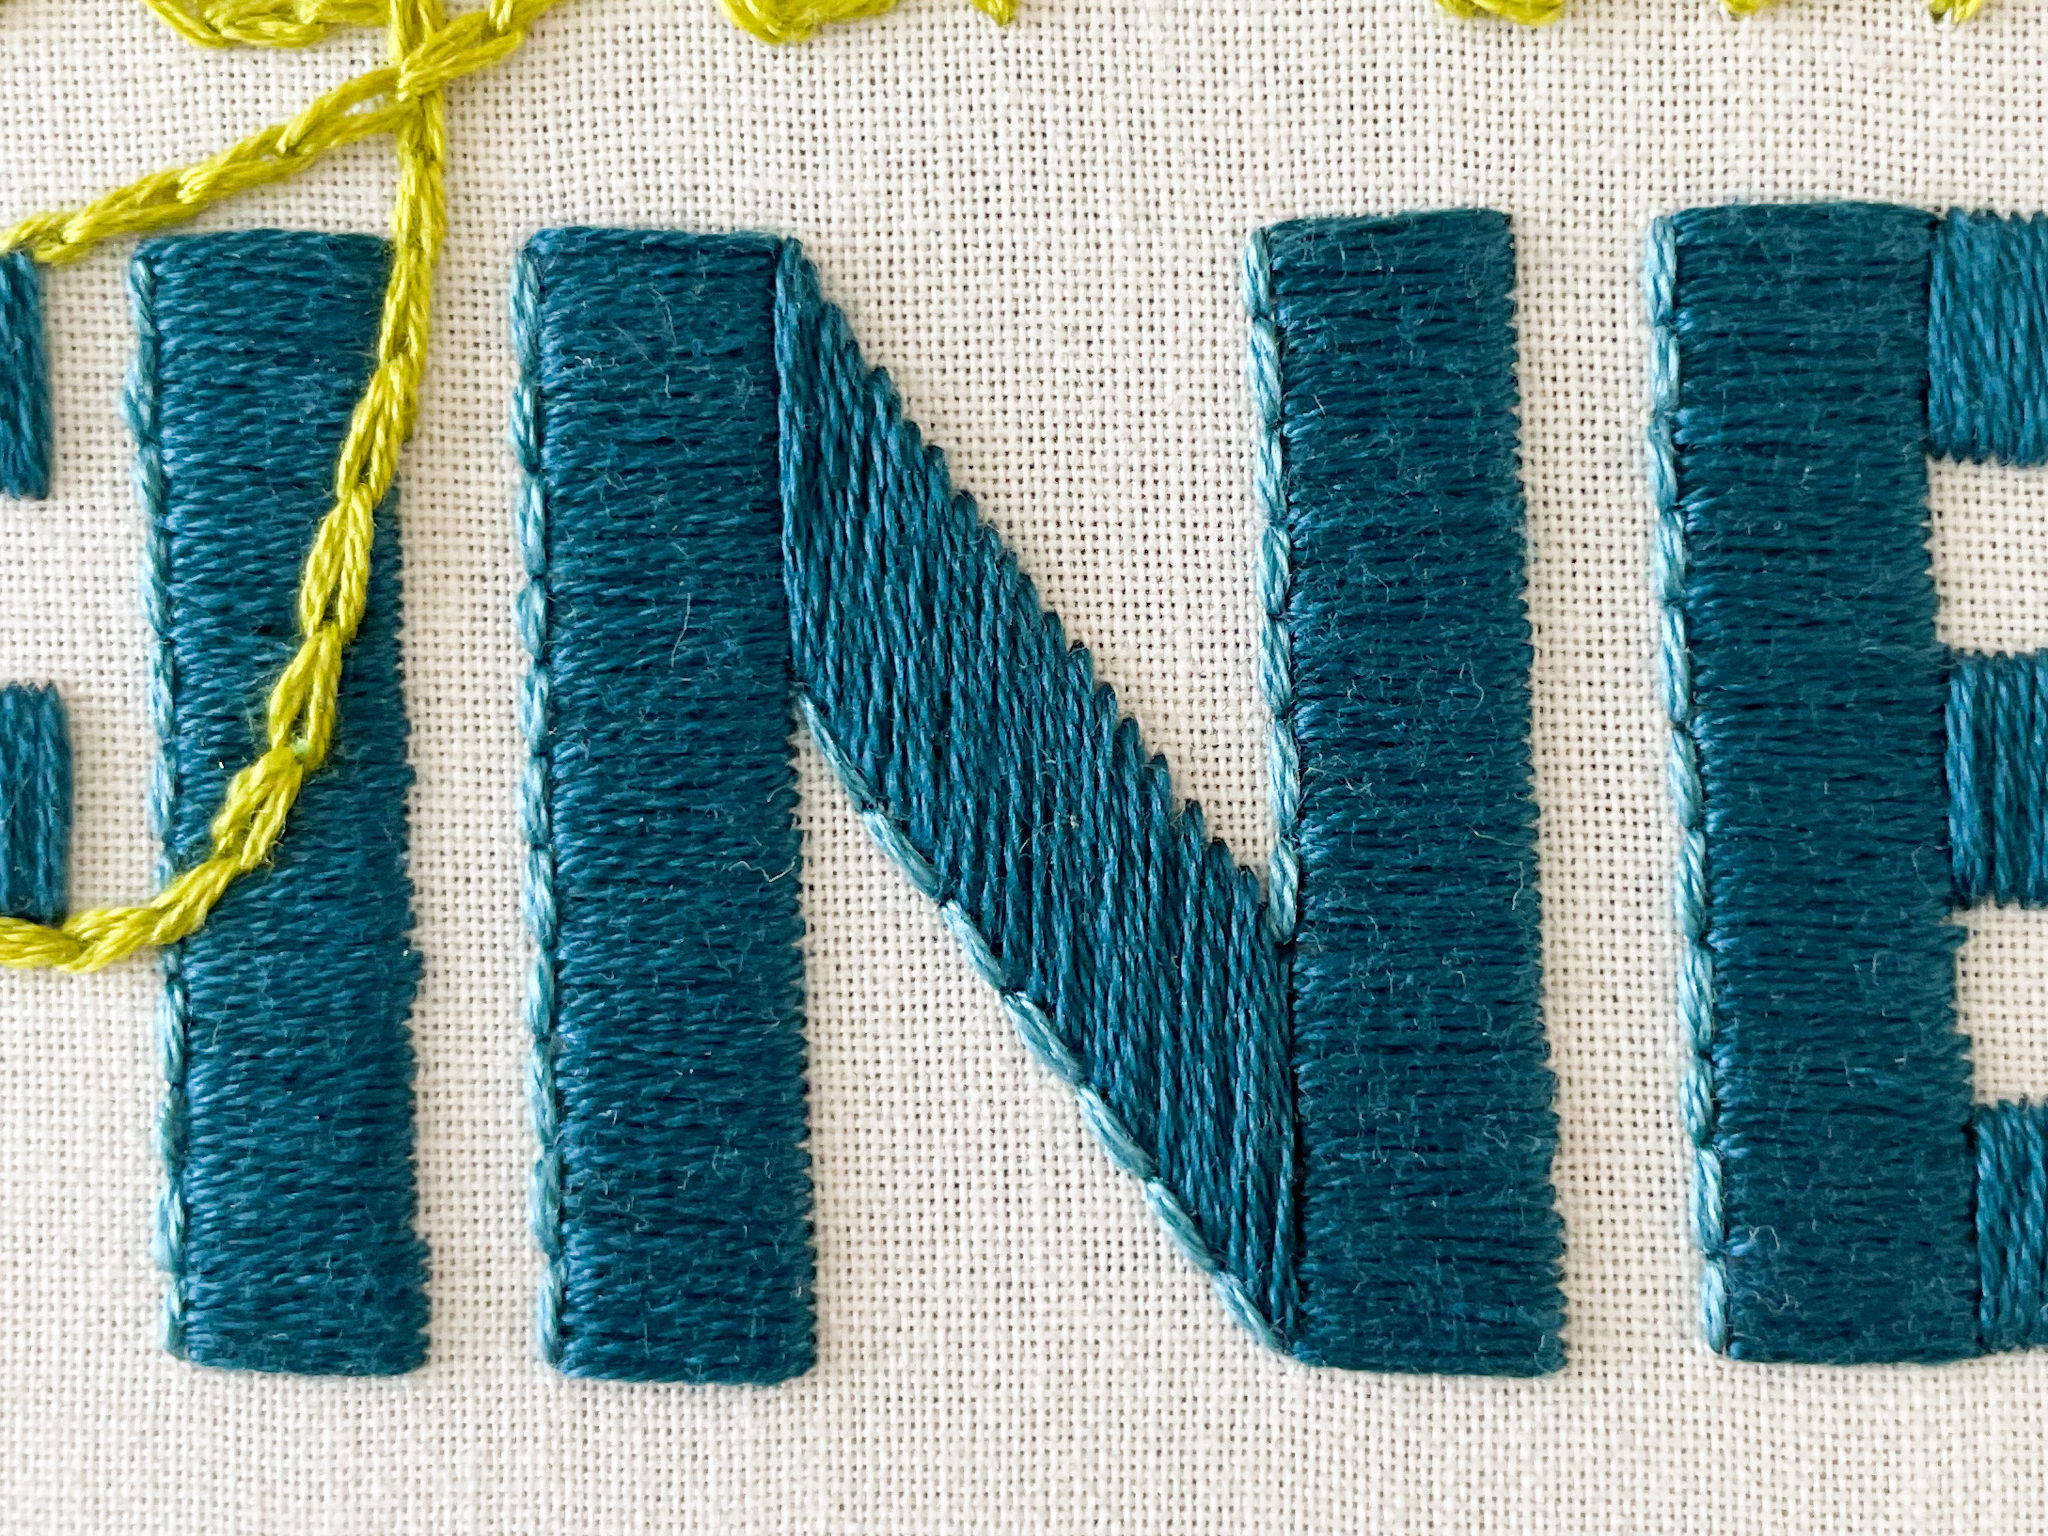 The letter "N" filled in with one of the best fill stitches for Thick embroidery letters, statin stitch. 